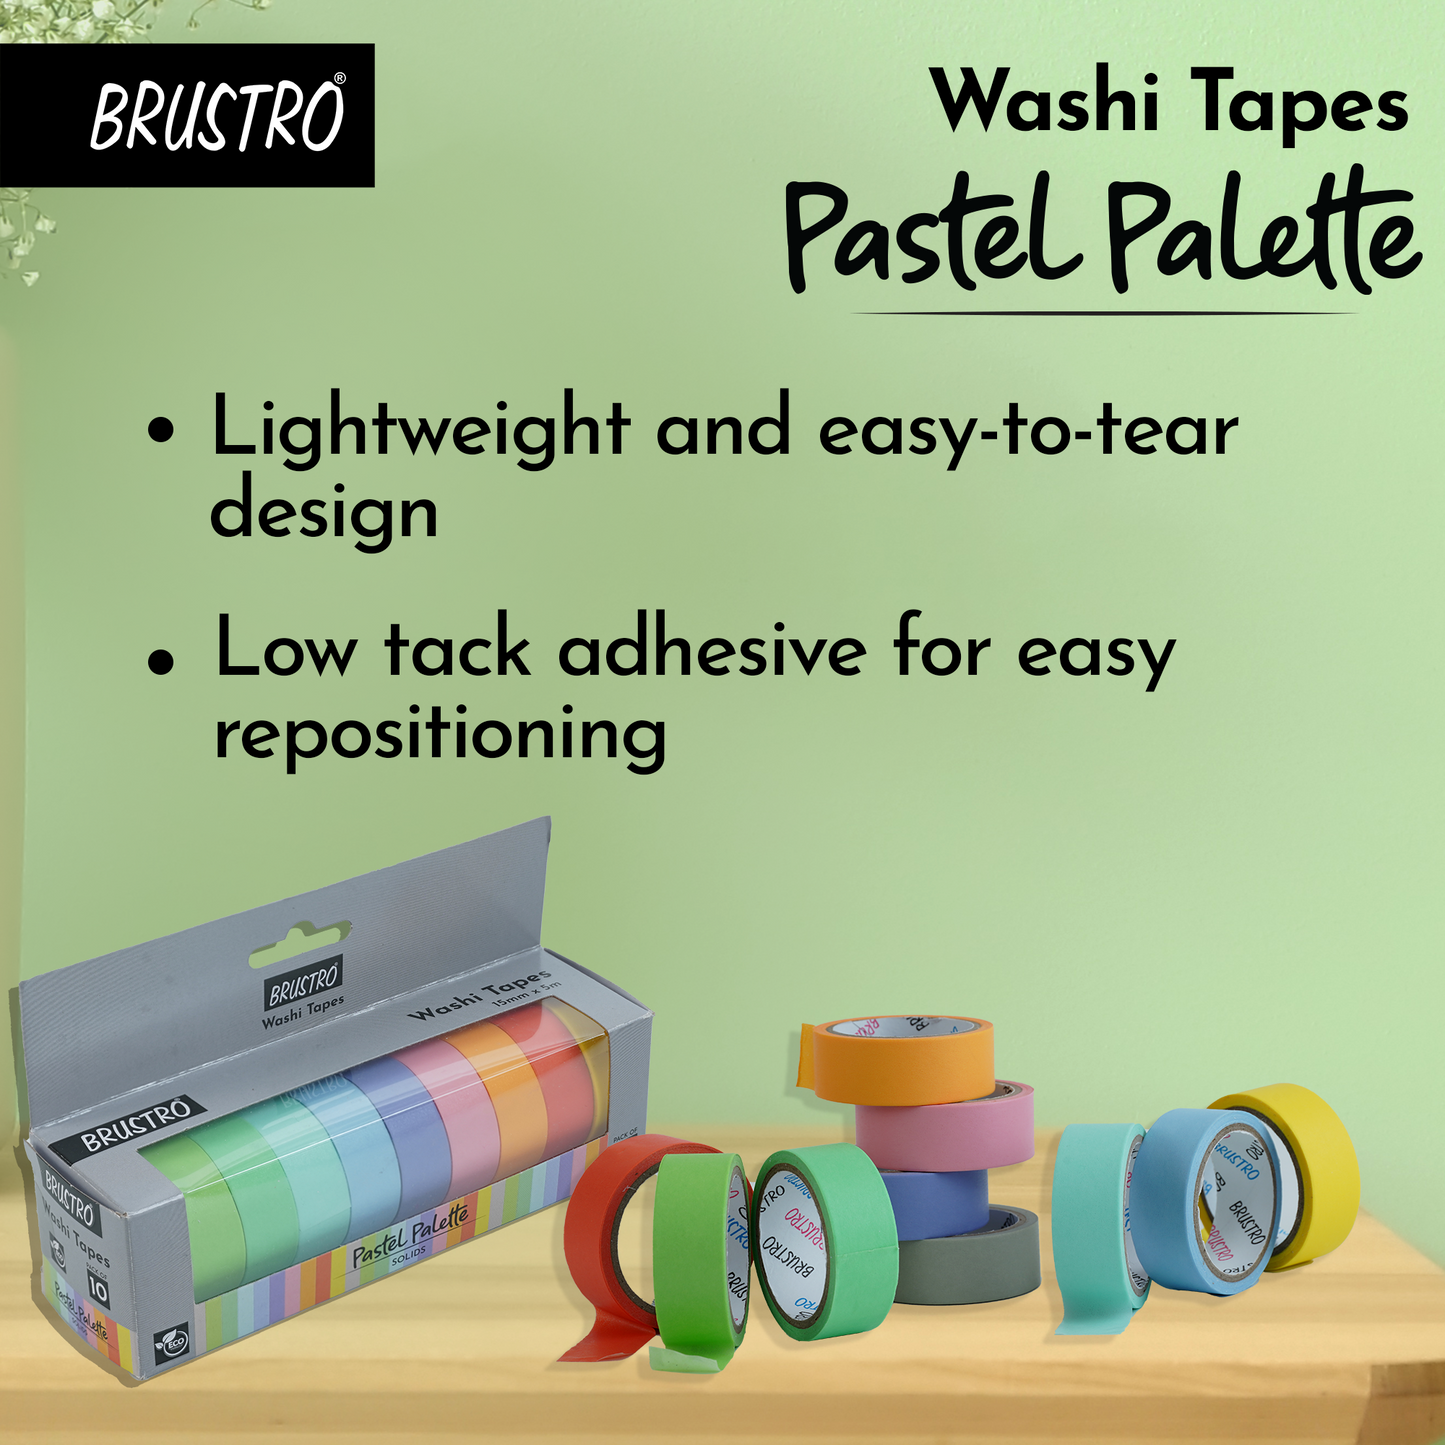 BRUSTRO Washi Tapes Pastel Palette Solids Shade, 15 mm X 5 mtrs (set of 10)